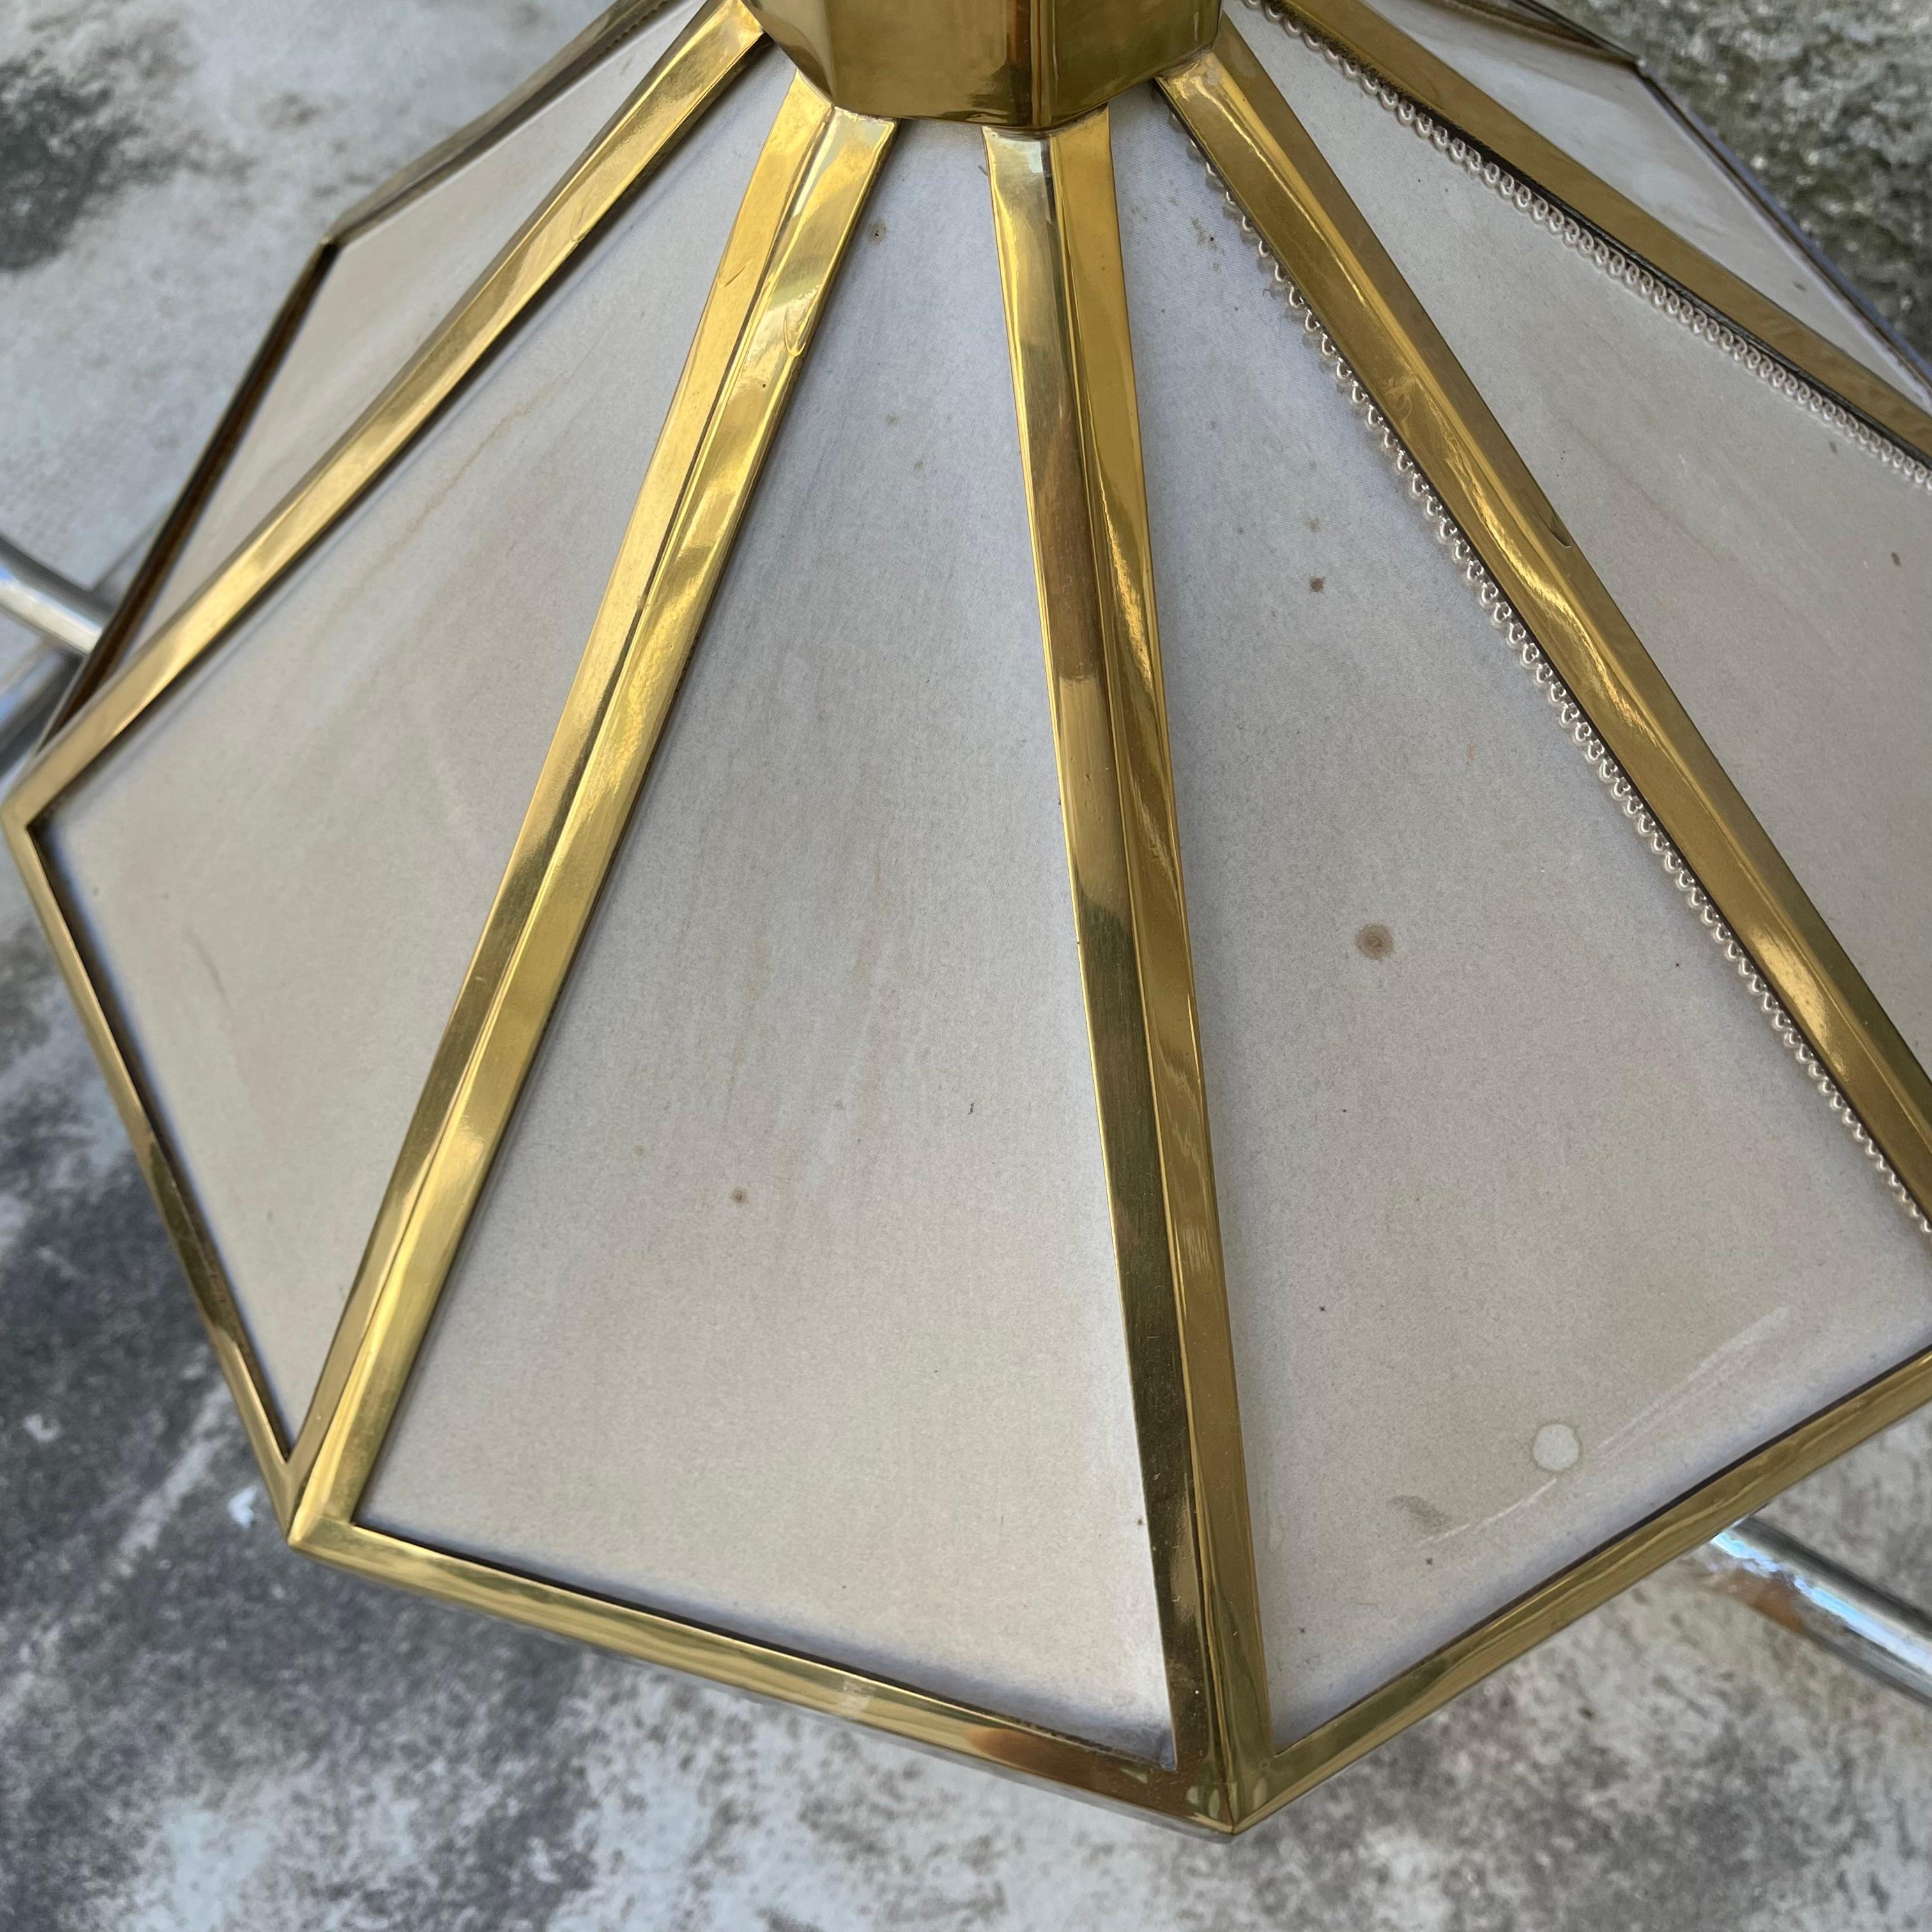 Mid-Century Modern Brass and Fabric Octagonal Chandelier - Italy - 1960s For Sale